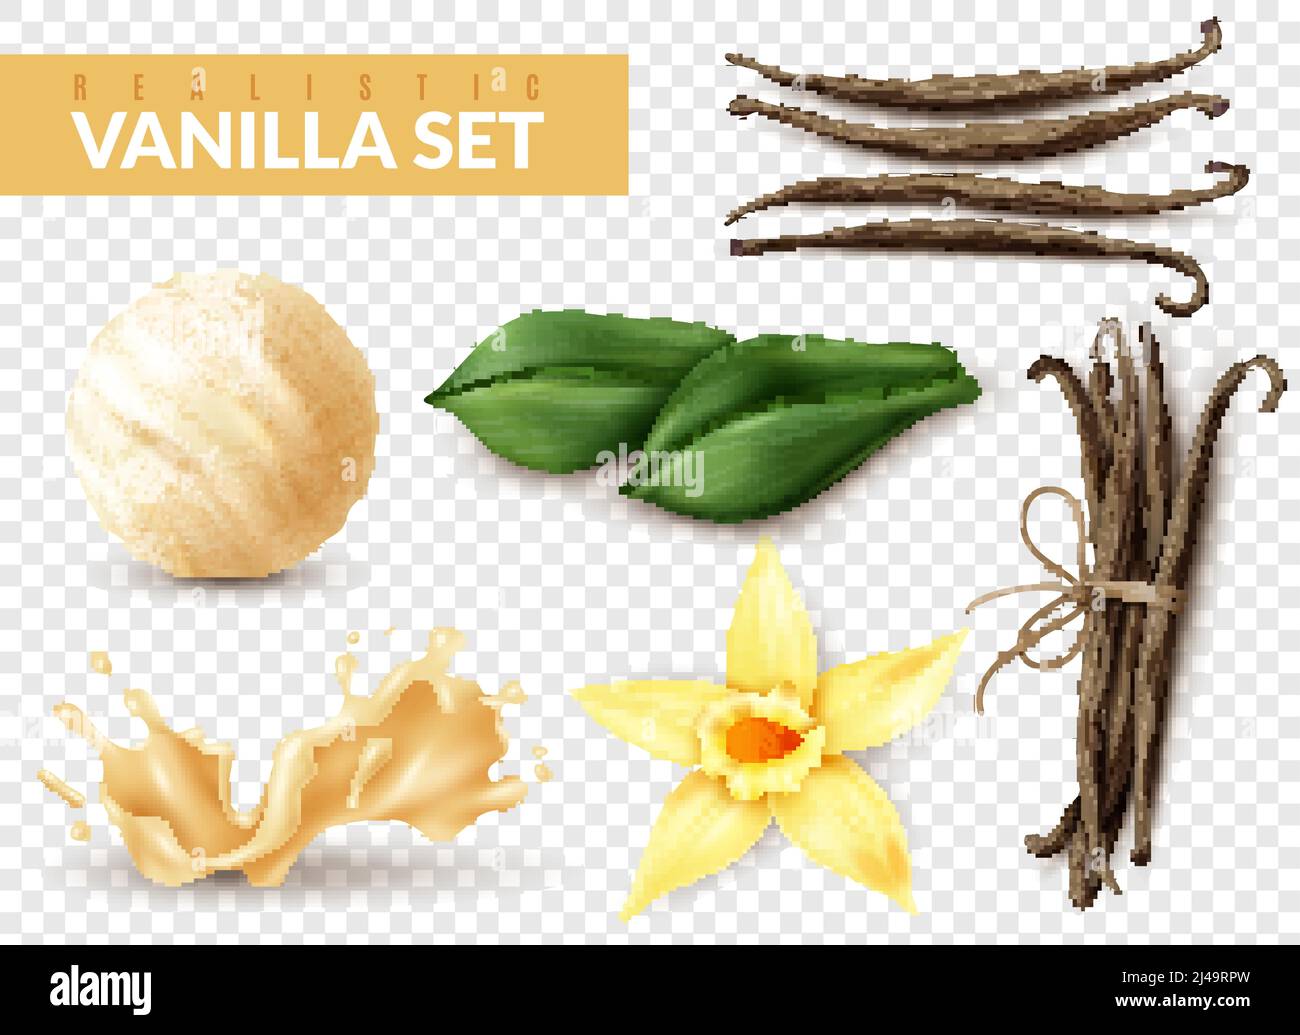 Vanilla realistic set with ice cream scoop shake splash flower dried beans leaves transparent background vector illustration Stock Vector